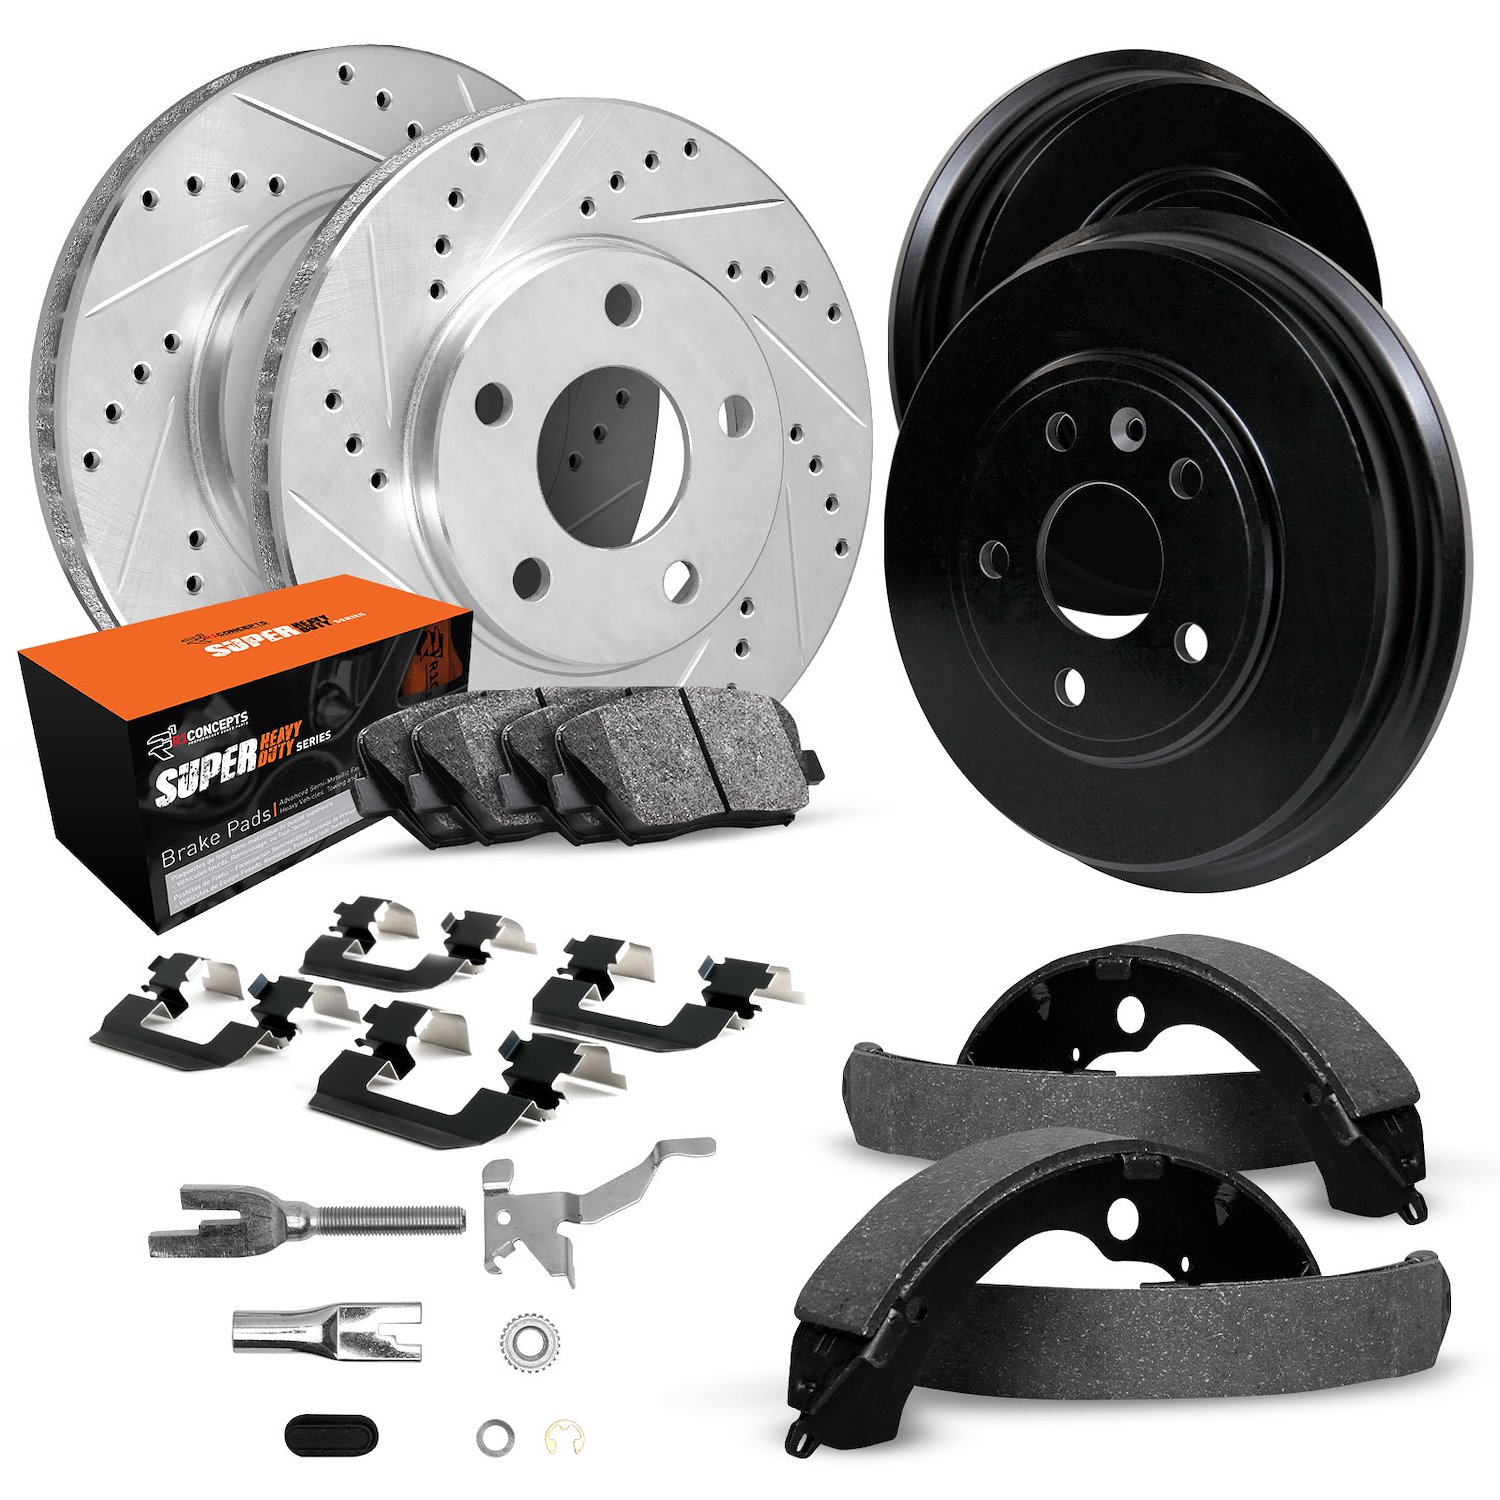 E-Line Drilled/Slotted Silver Rotor & Drum Set w/Super-Duty Pads, Shoes/Hardware/Adjusters, 1975-1979 Ford/Lincoln/Mercury/Mazda